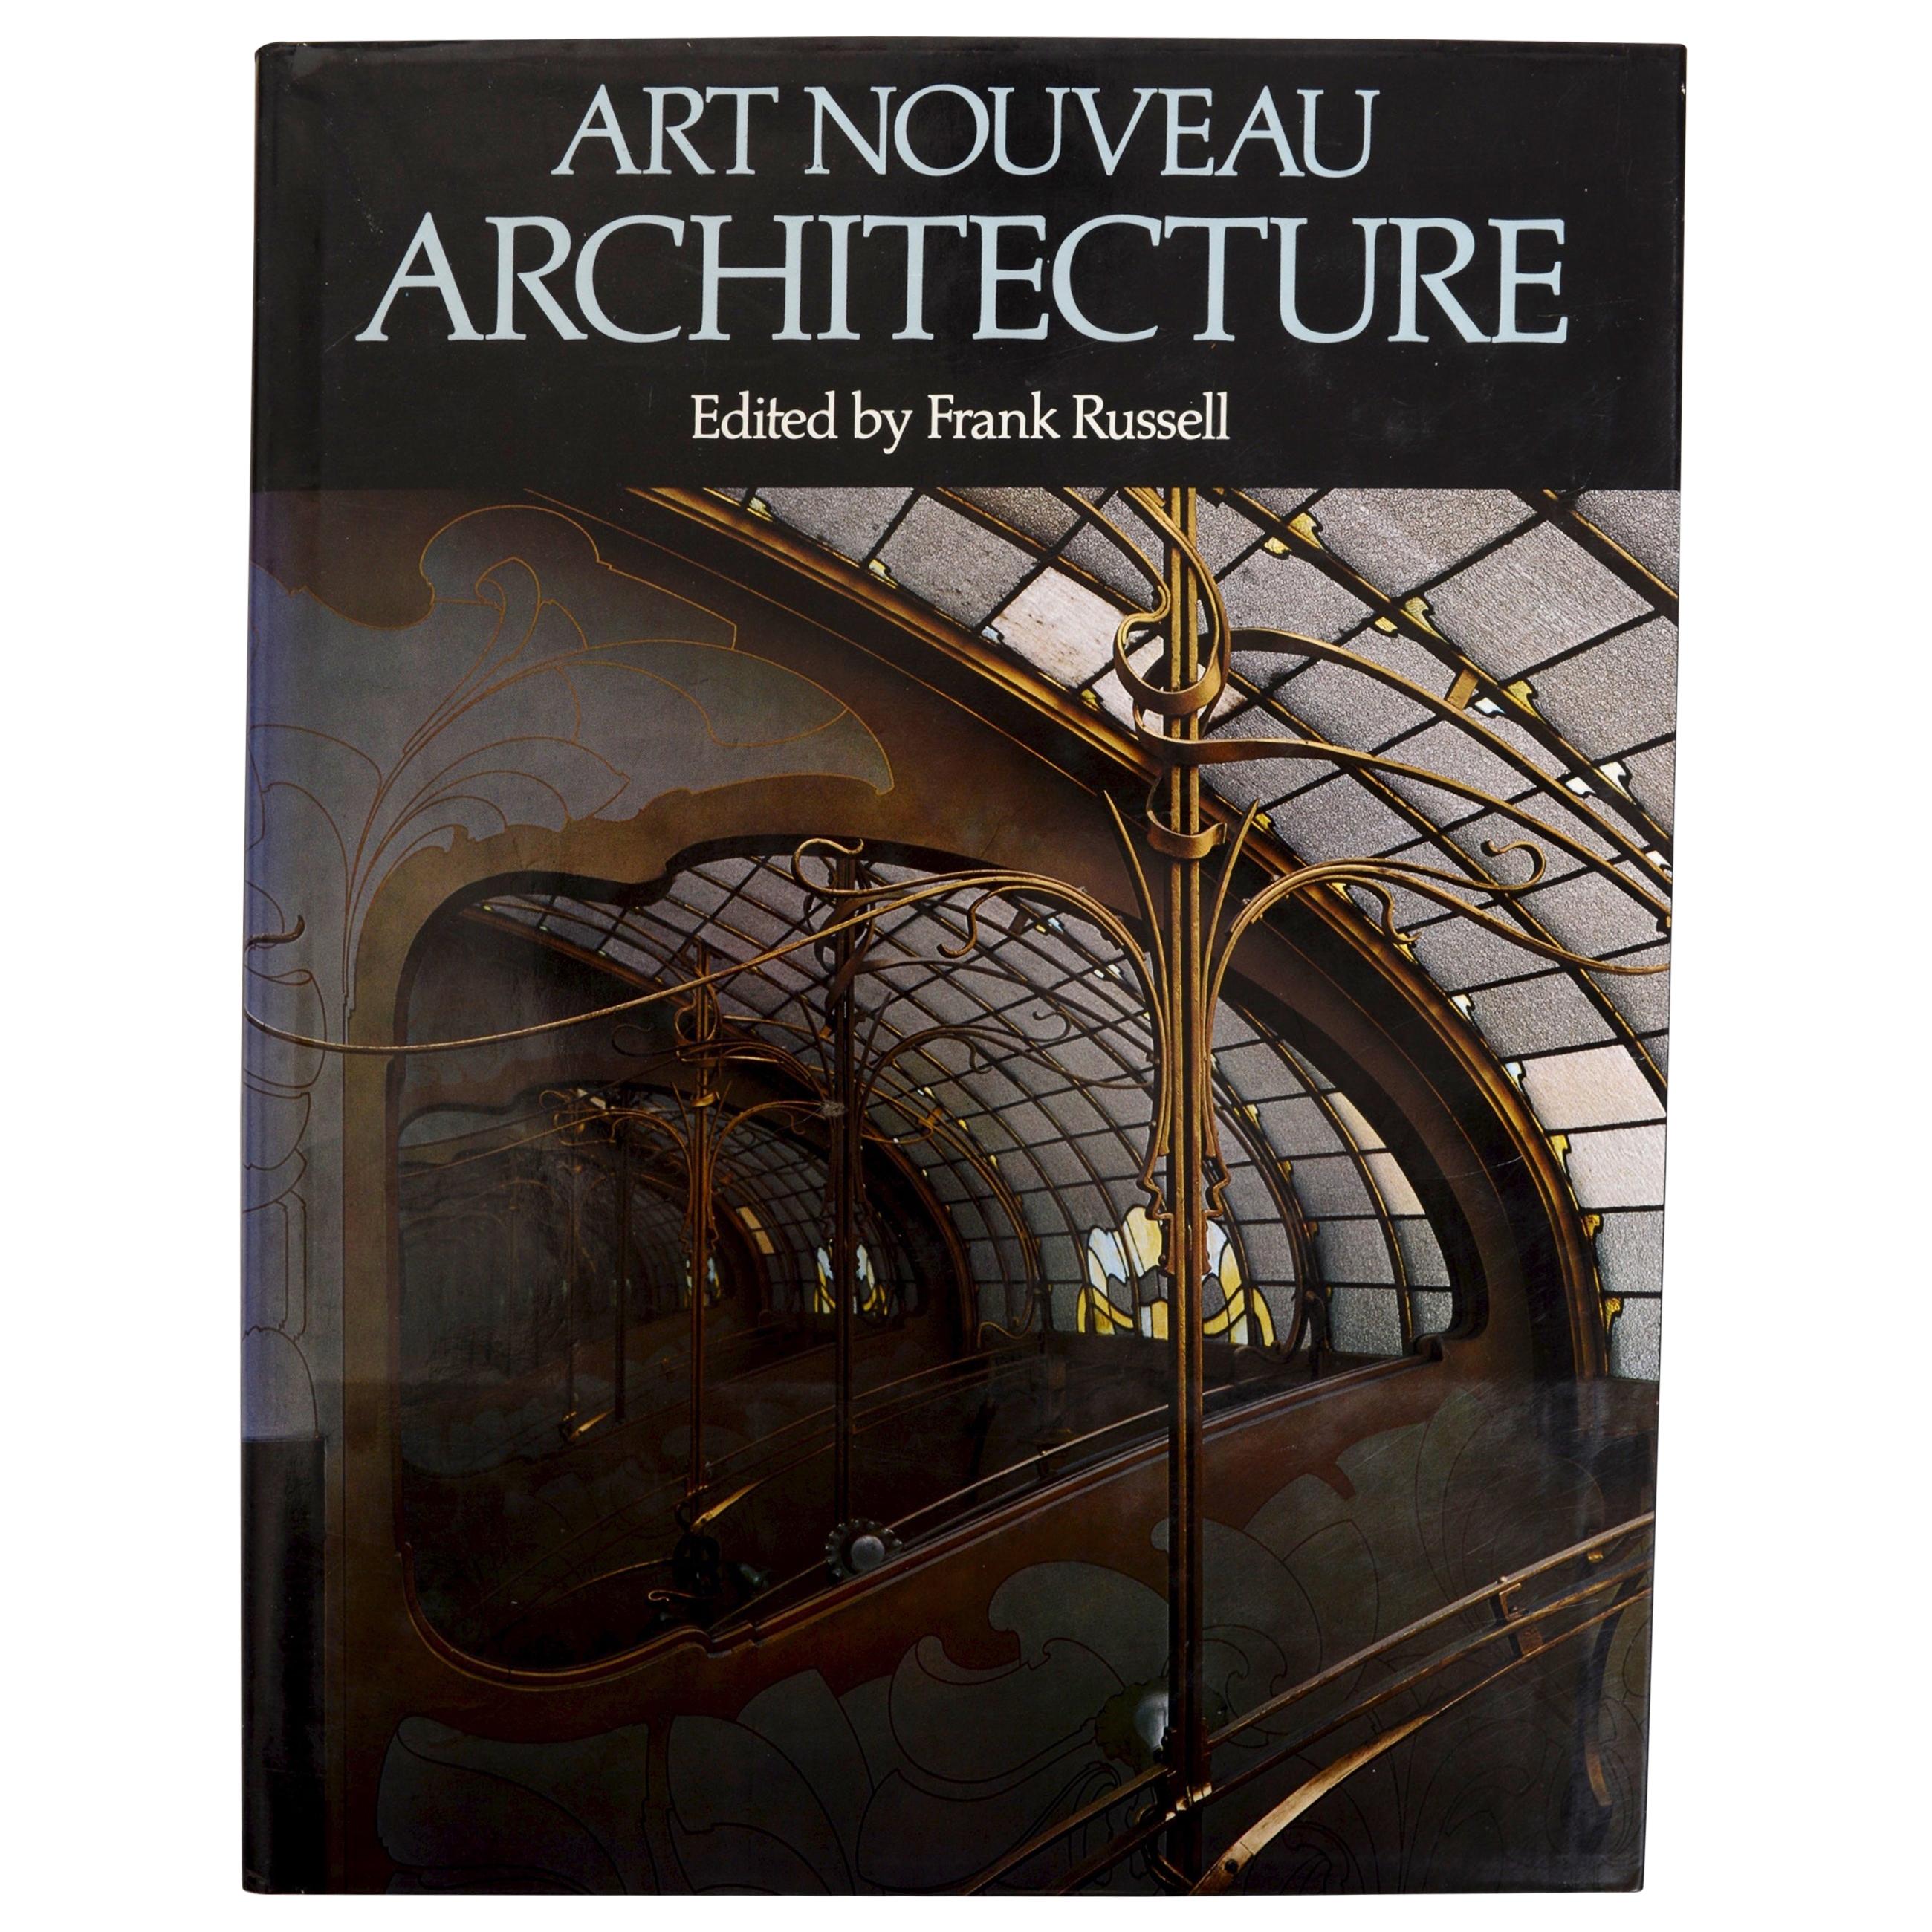 Art Nouveau Architecture by Frank Russell